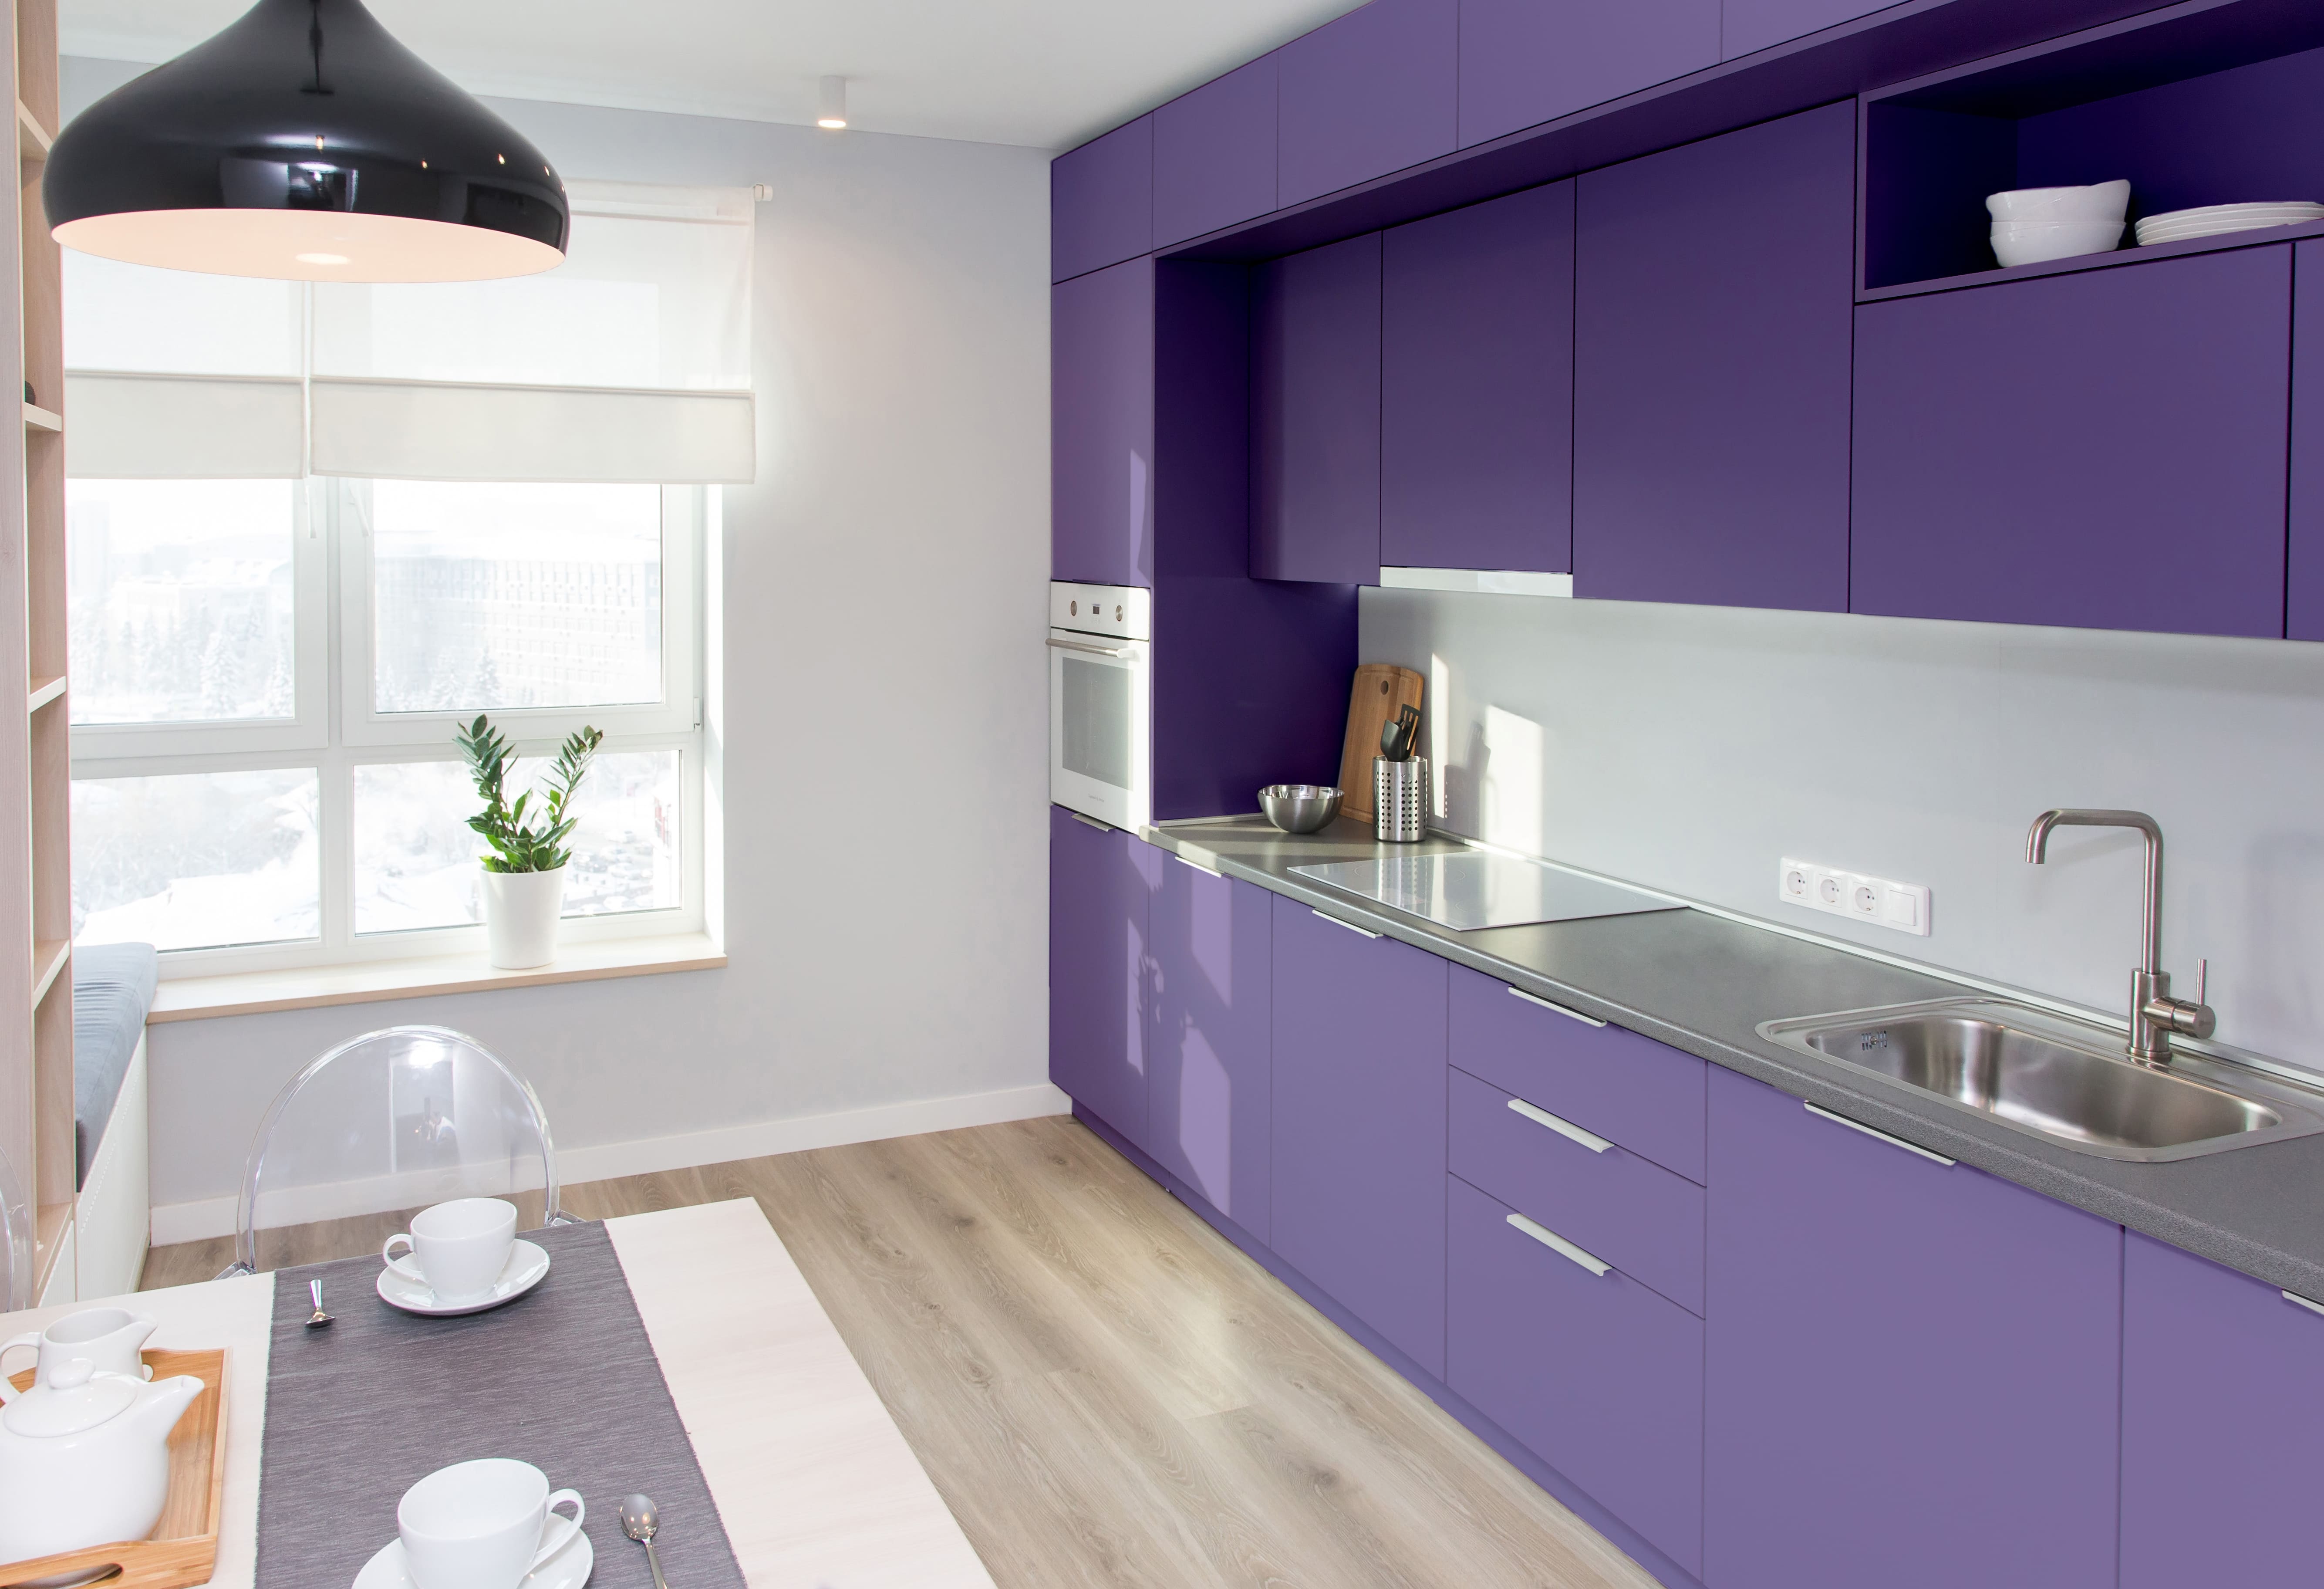 Home interior designers in Bangalore - Top 10 Straight Kitchen Design Ideas for Your Lovely Home